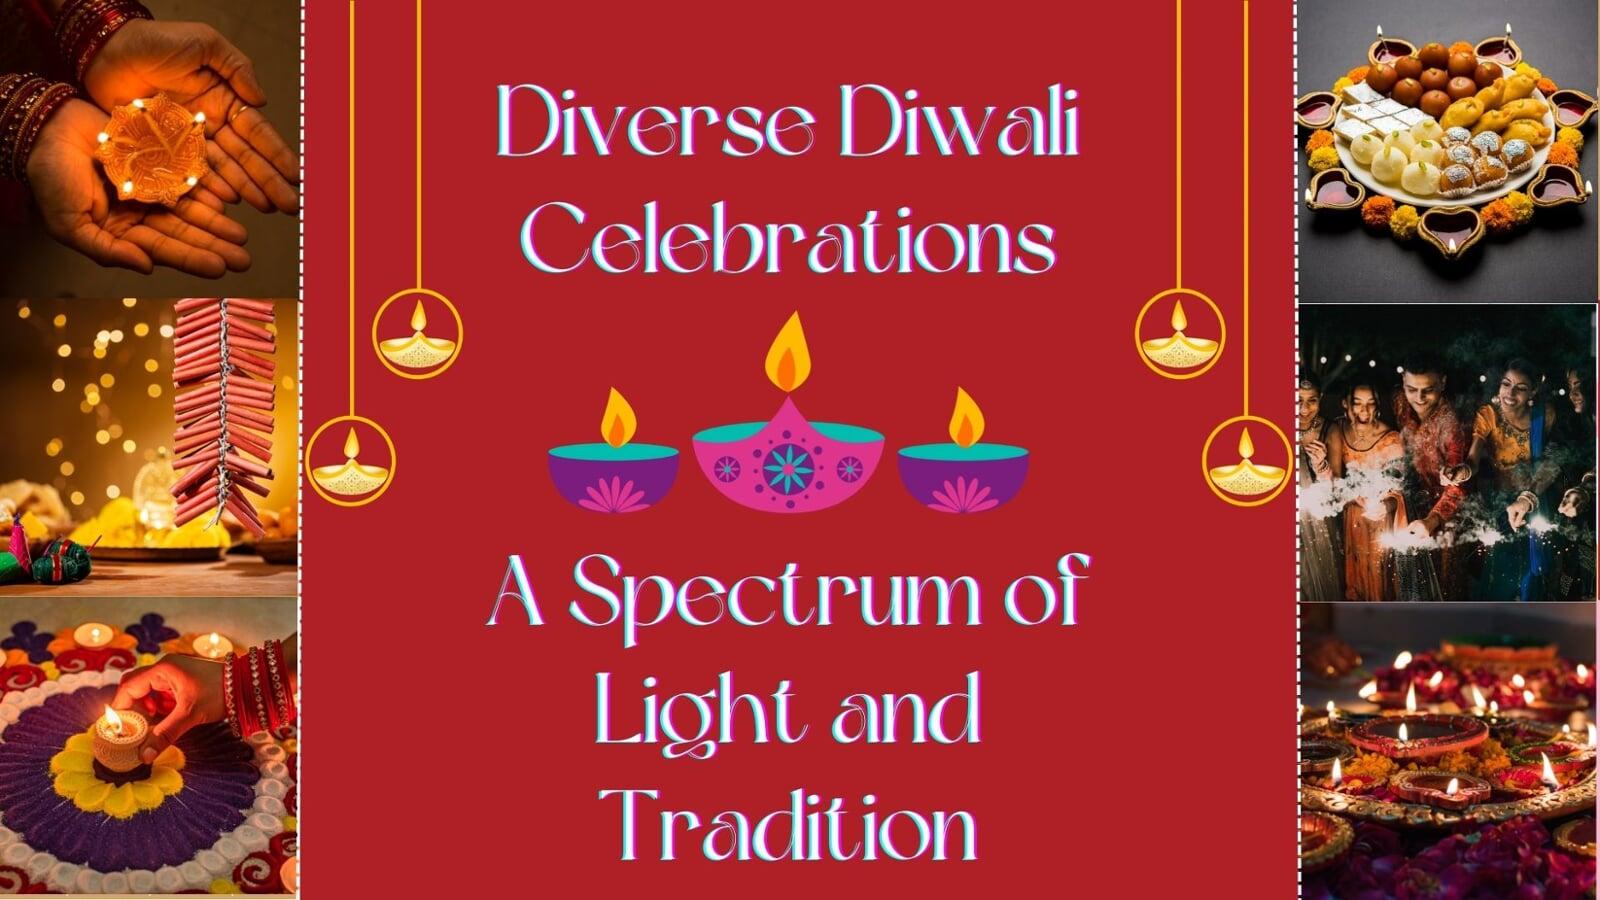 Diverse Diwali Celebrations: A Spectrum of Light and Tradition